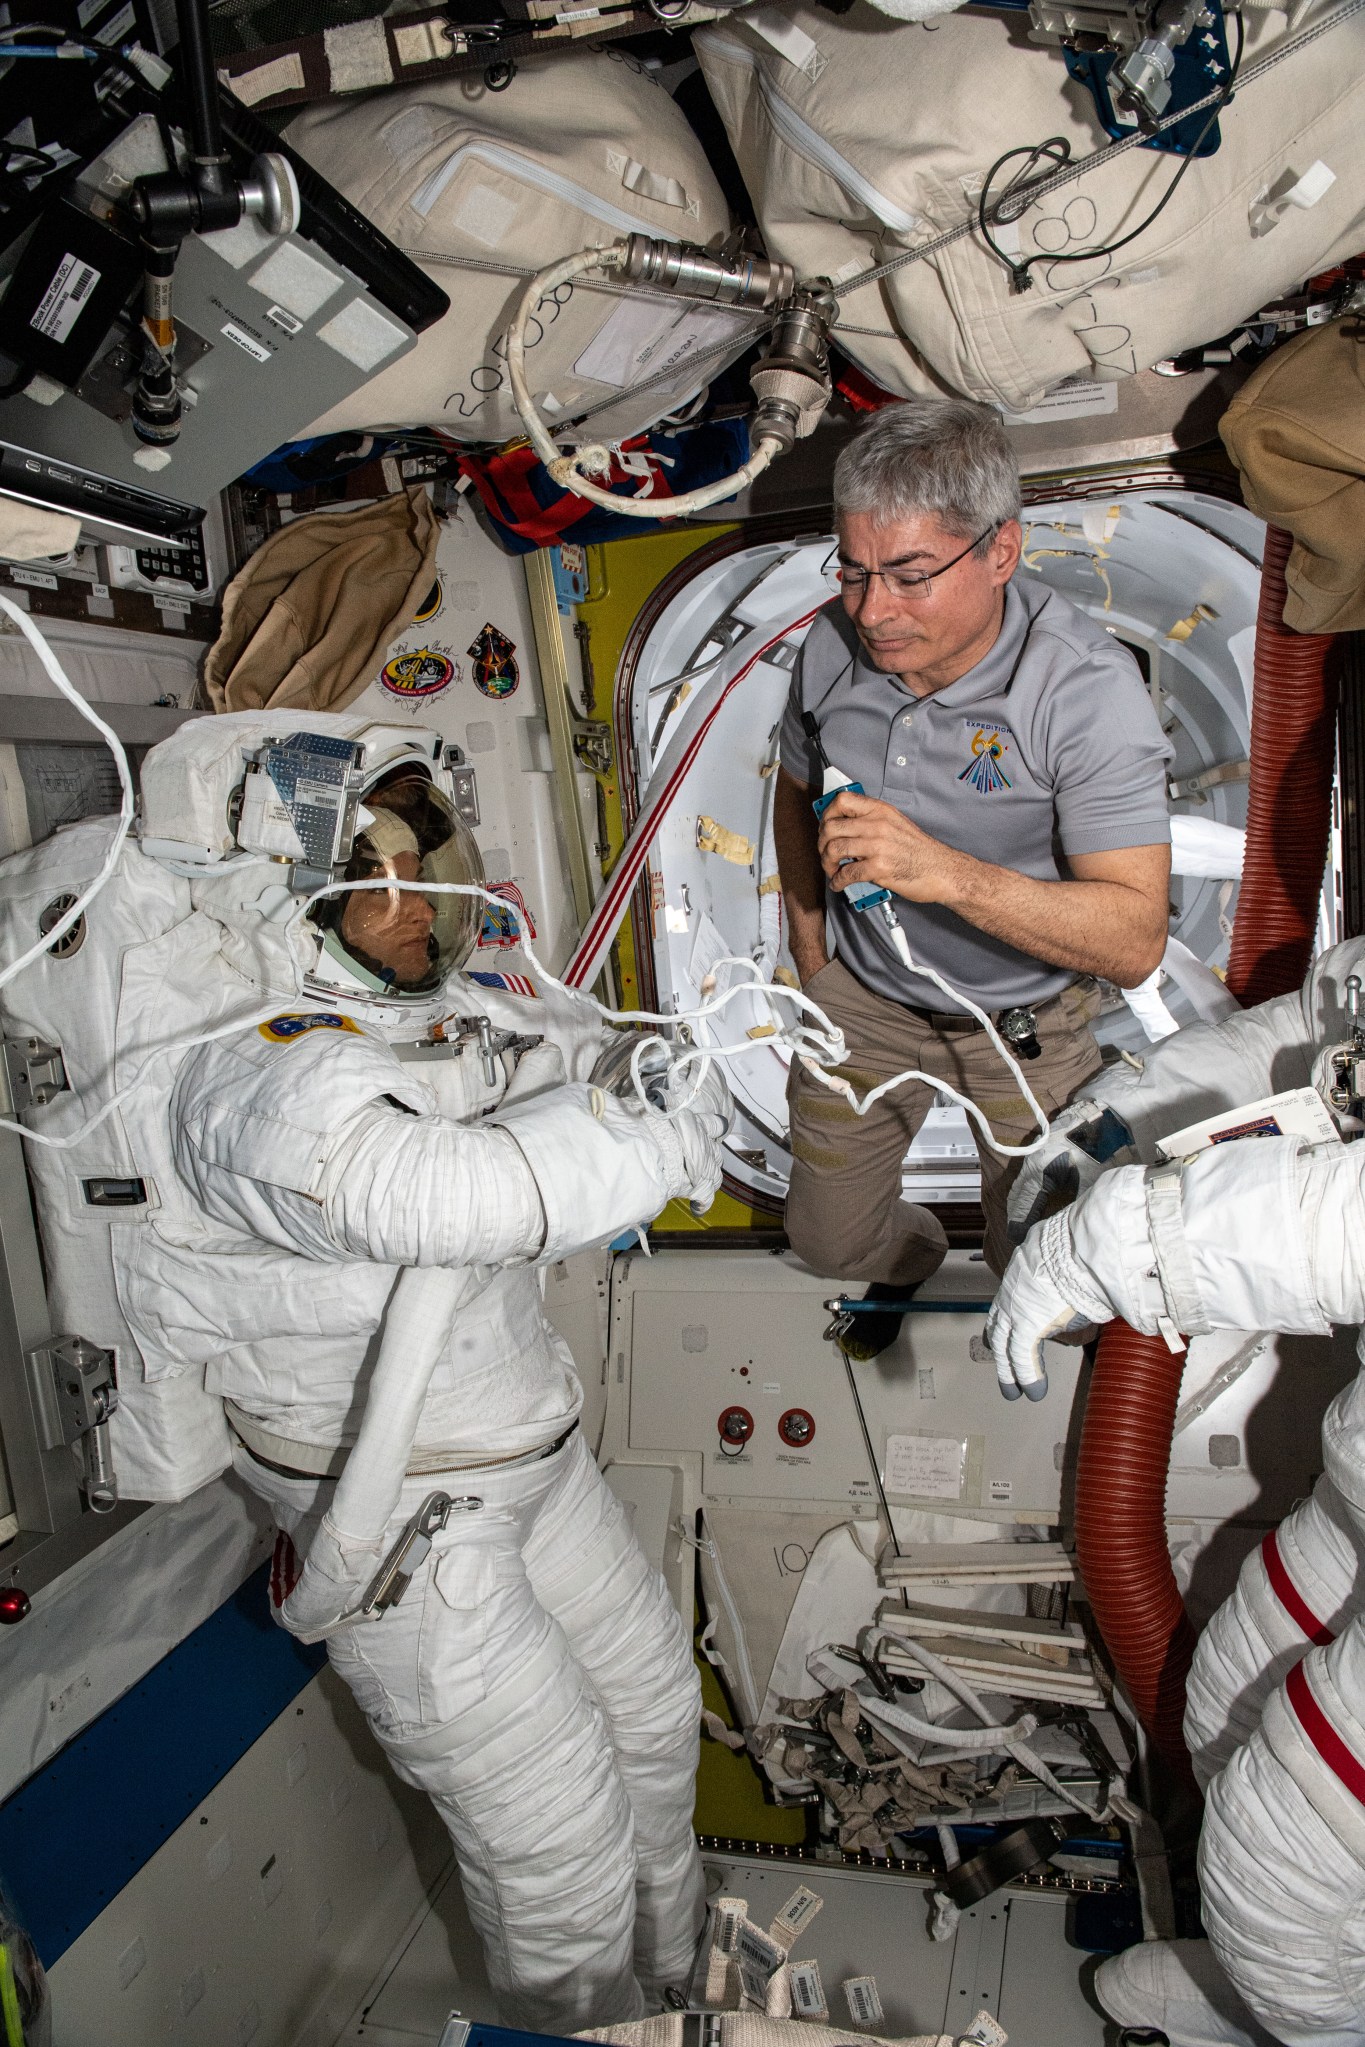 NASA astronaut Kayla Barron in her Extravehicular Mobility Unit during Expedition 66. NASA astronaut Mark Vande Hei is visible in the background.